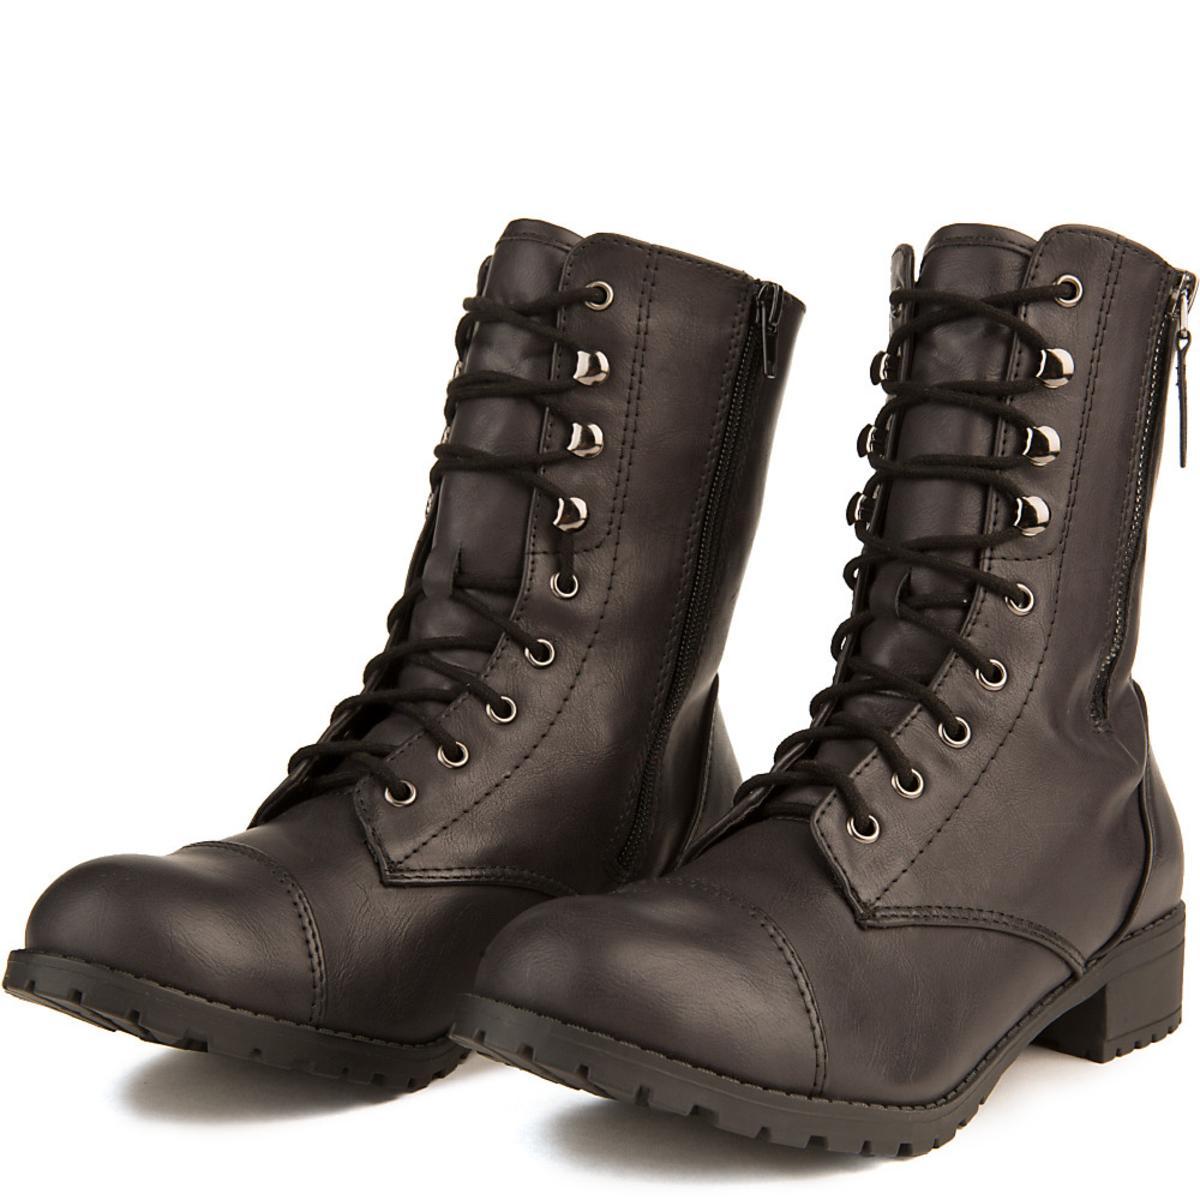 Footer-S Lace-Up Combat Boot Black